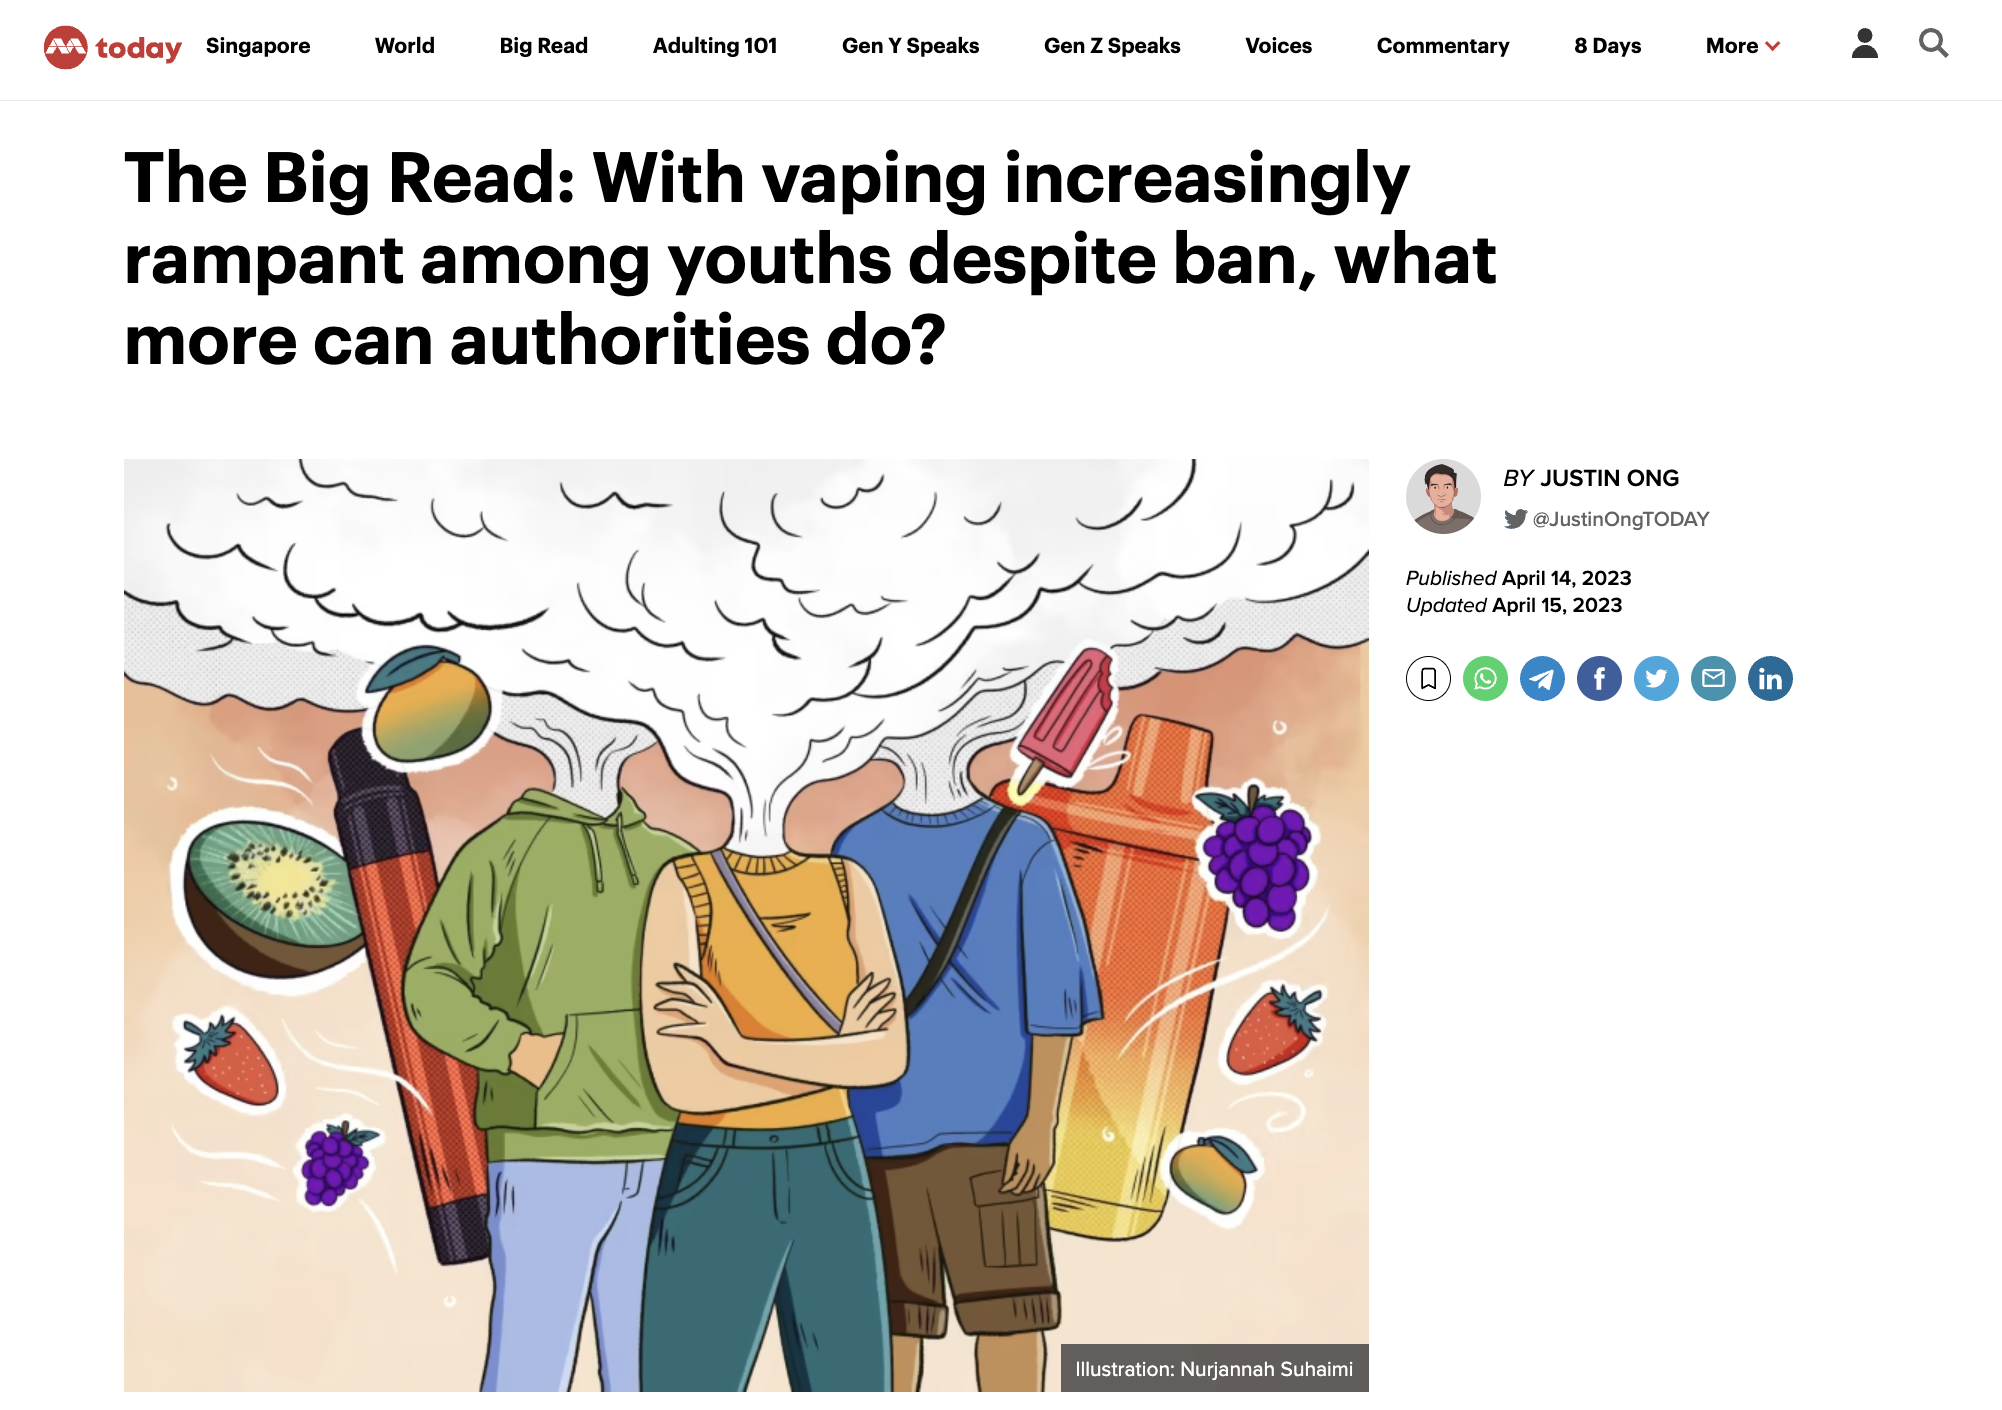 With vaping increasingly rampant among youths despite ban, what more can authorities do?